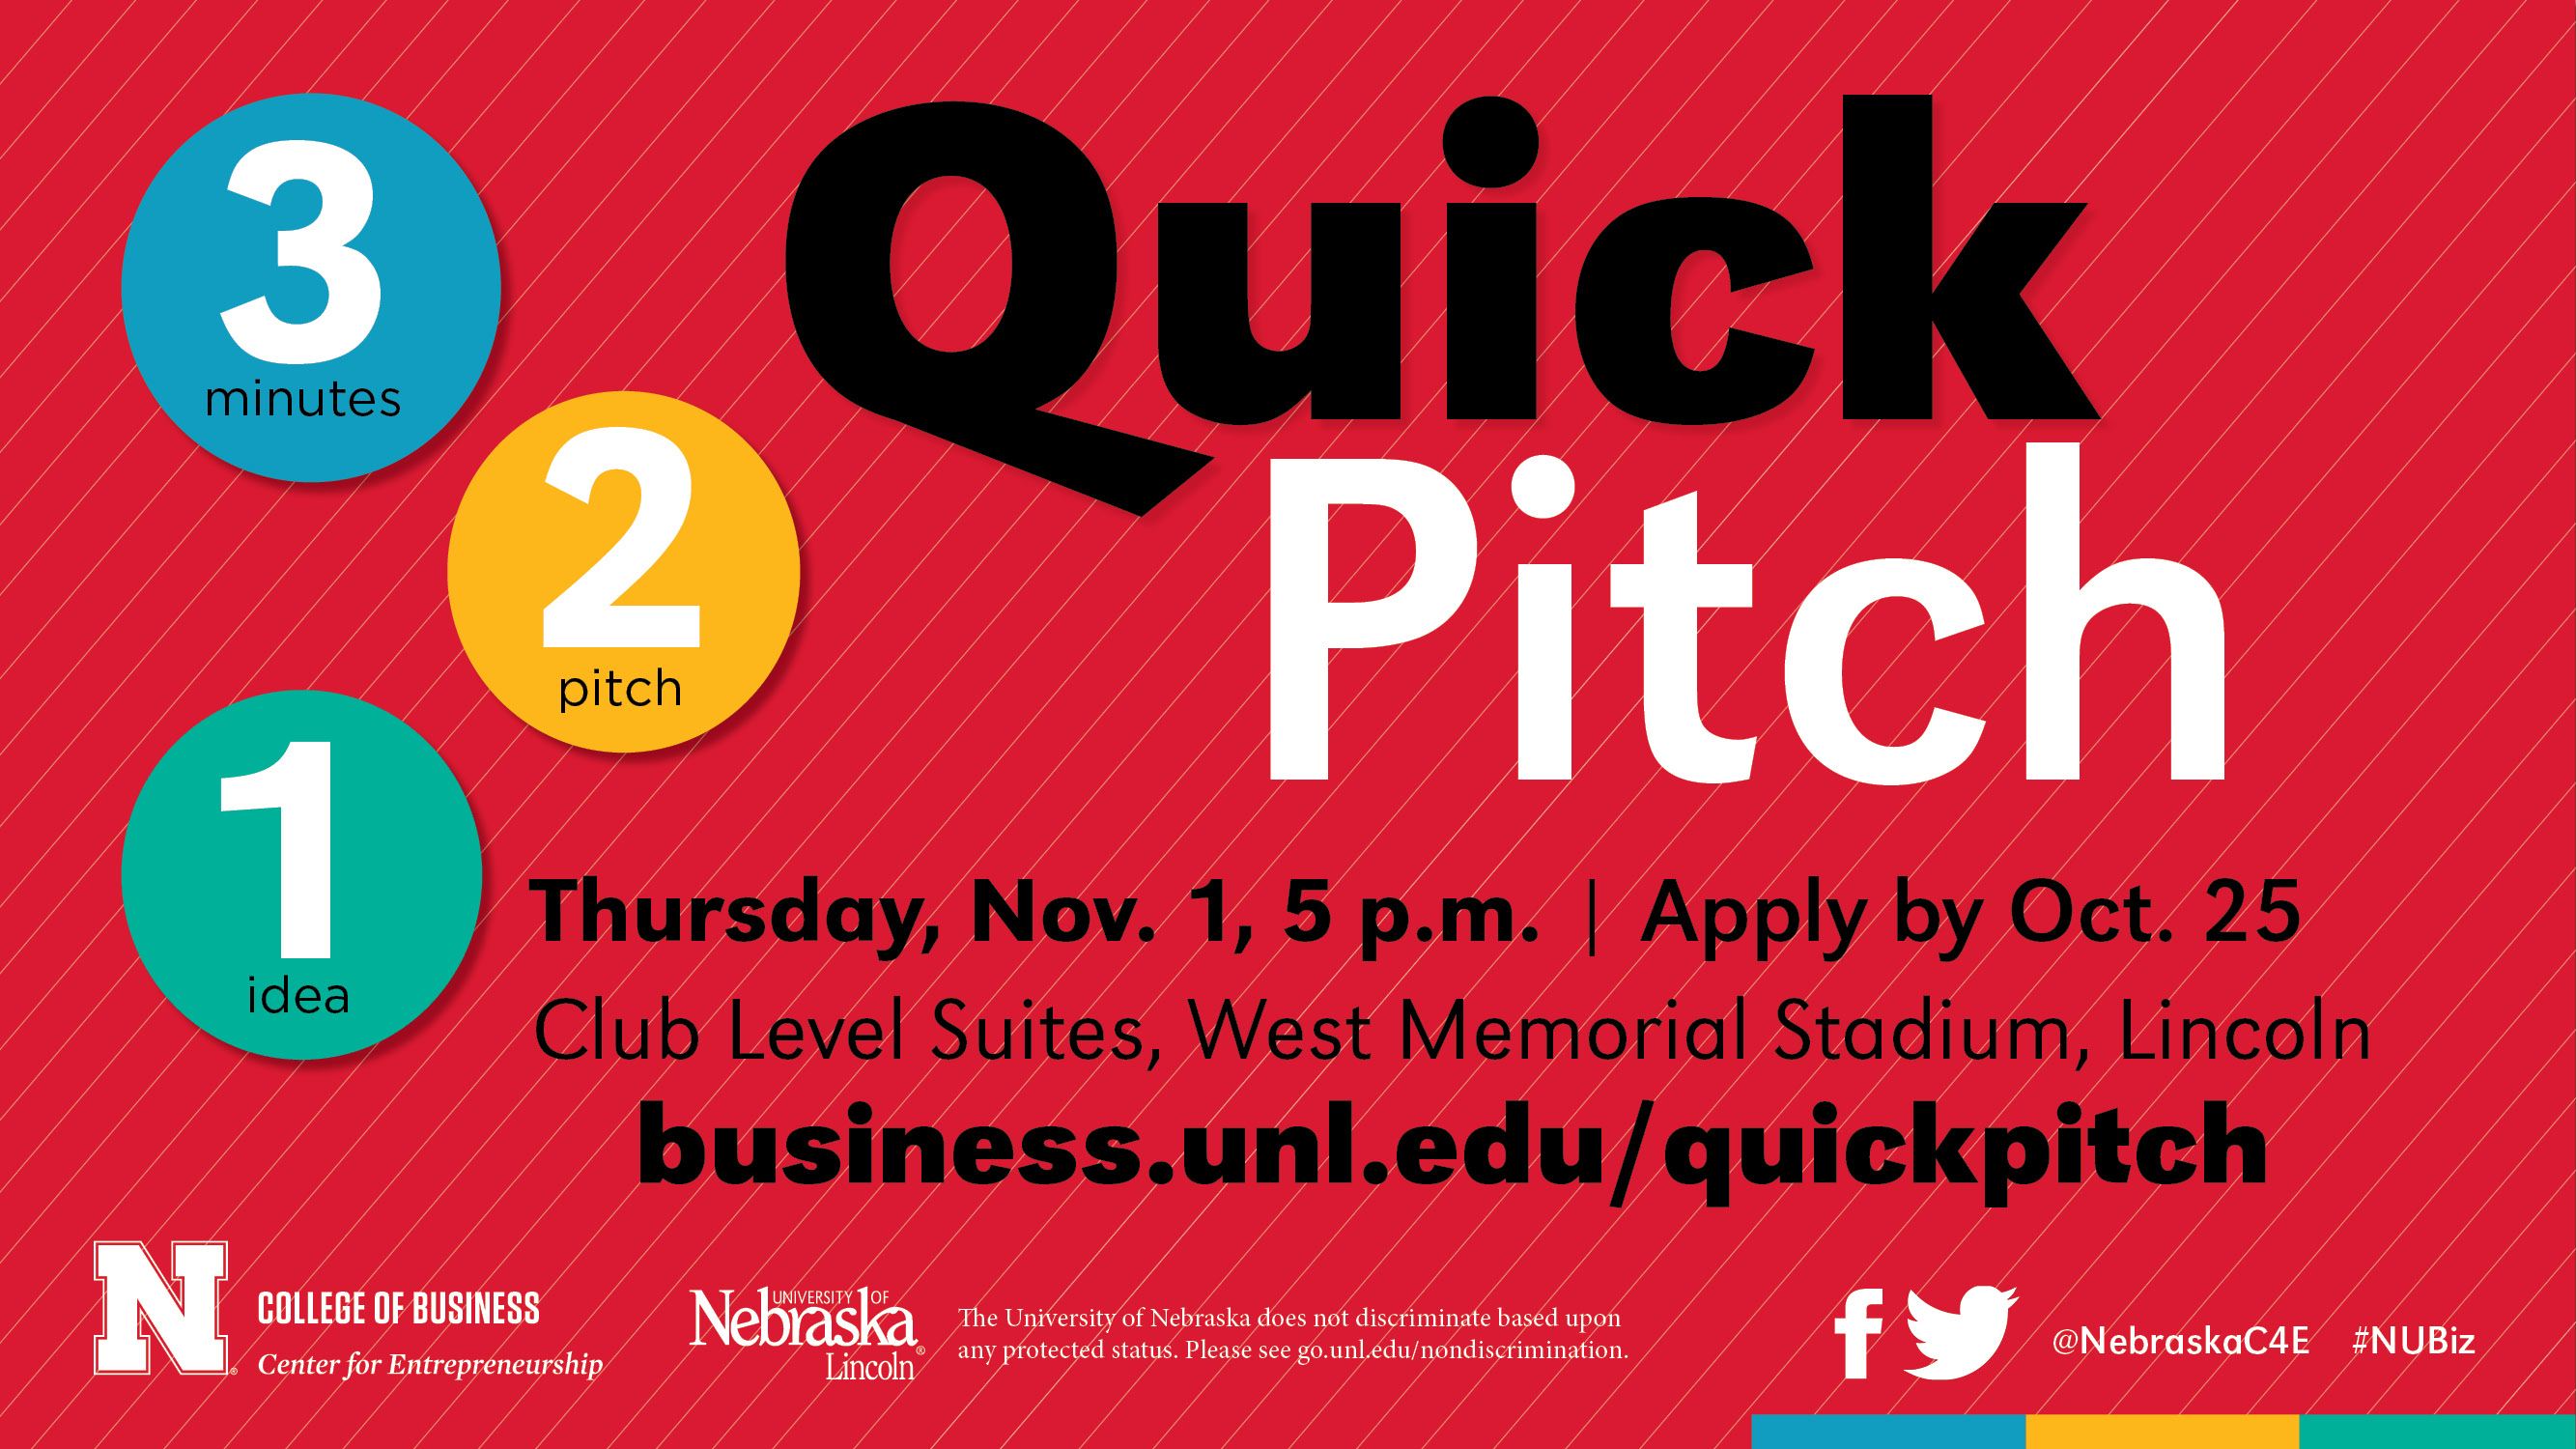 Register now to compete in 3-2-1 Quick Pitch!